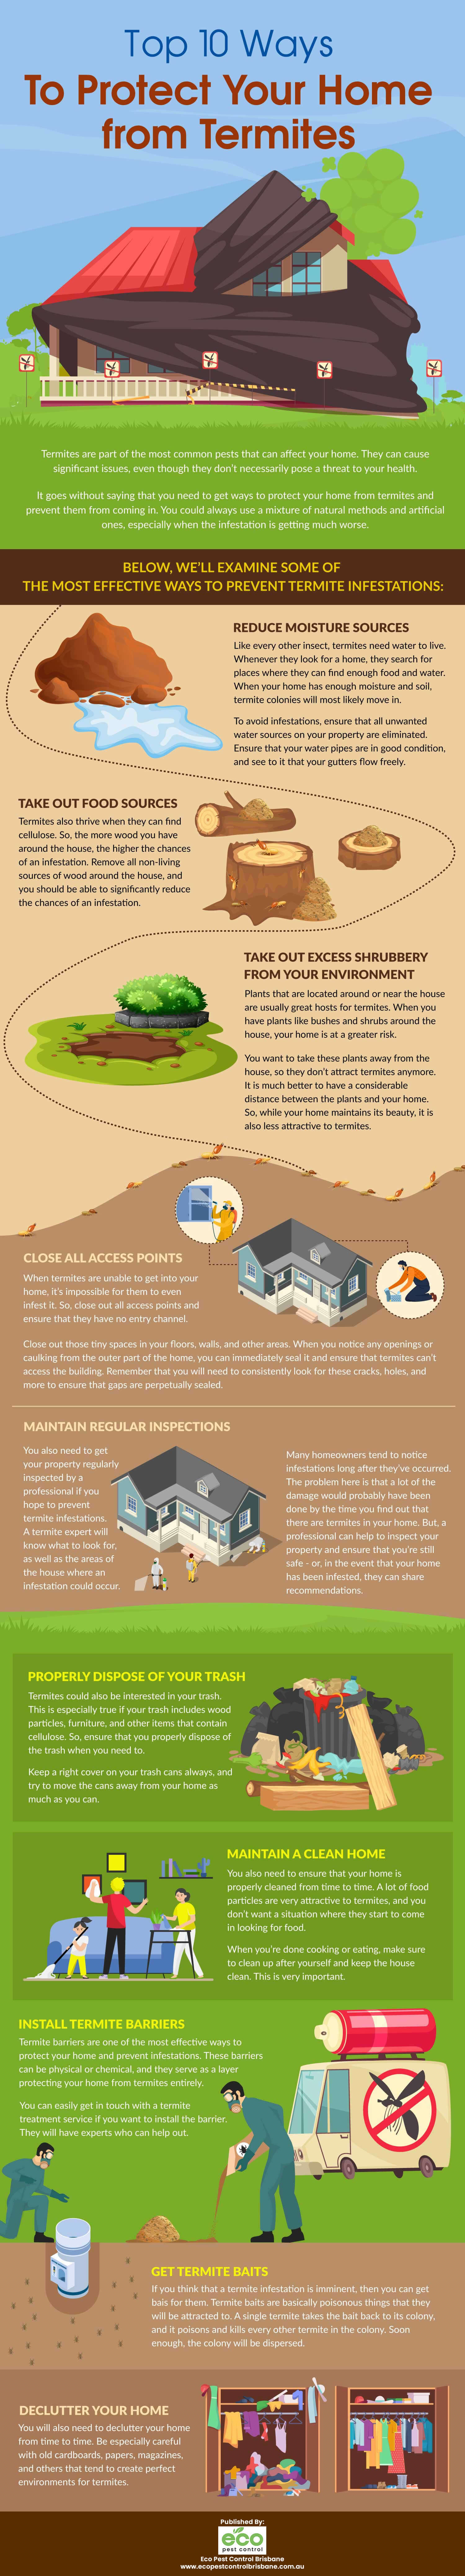 Top 10 Ways To Protect Your Home from Termites - Infographic